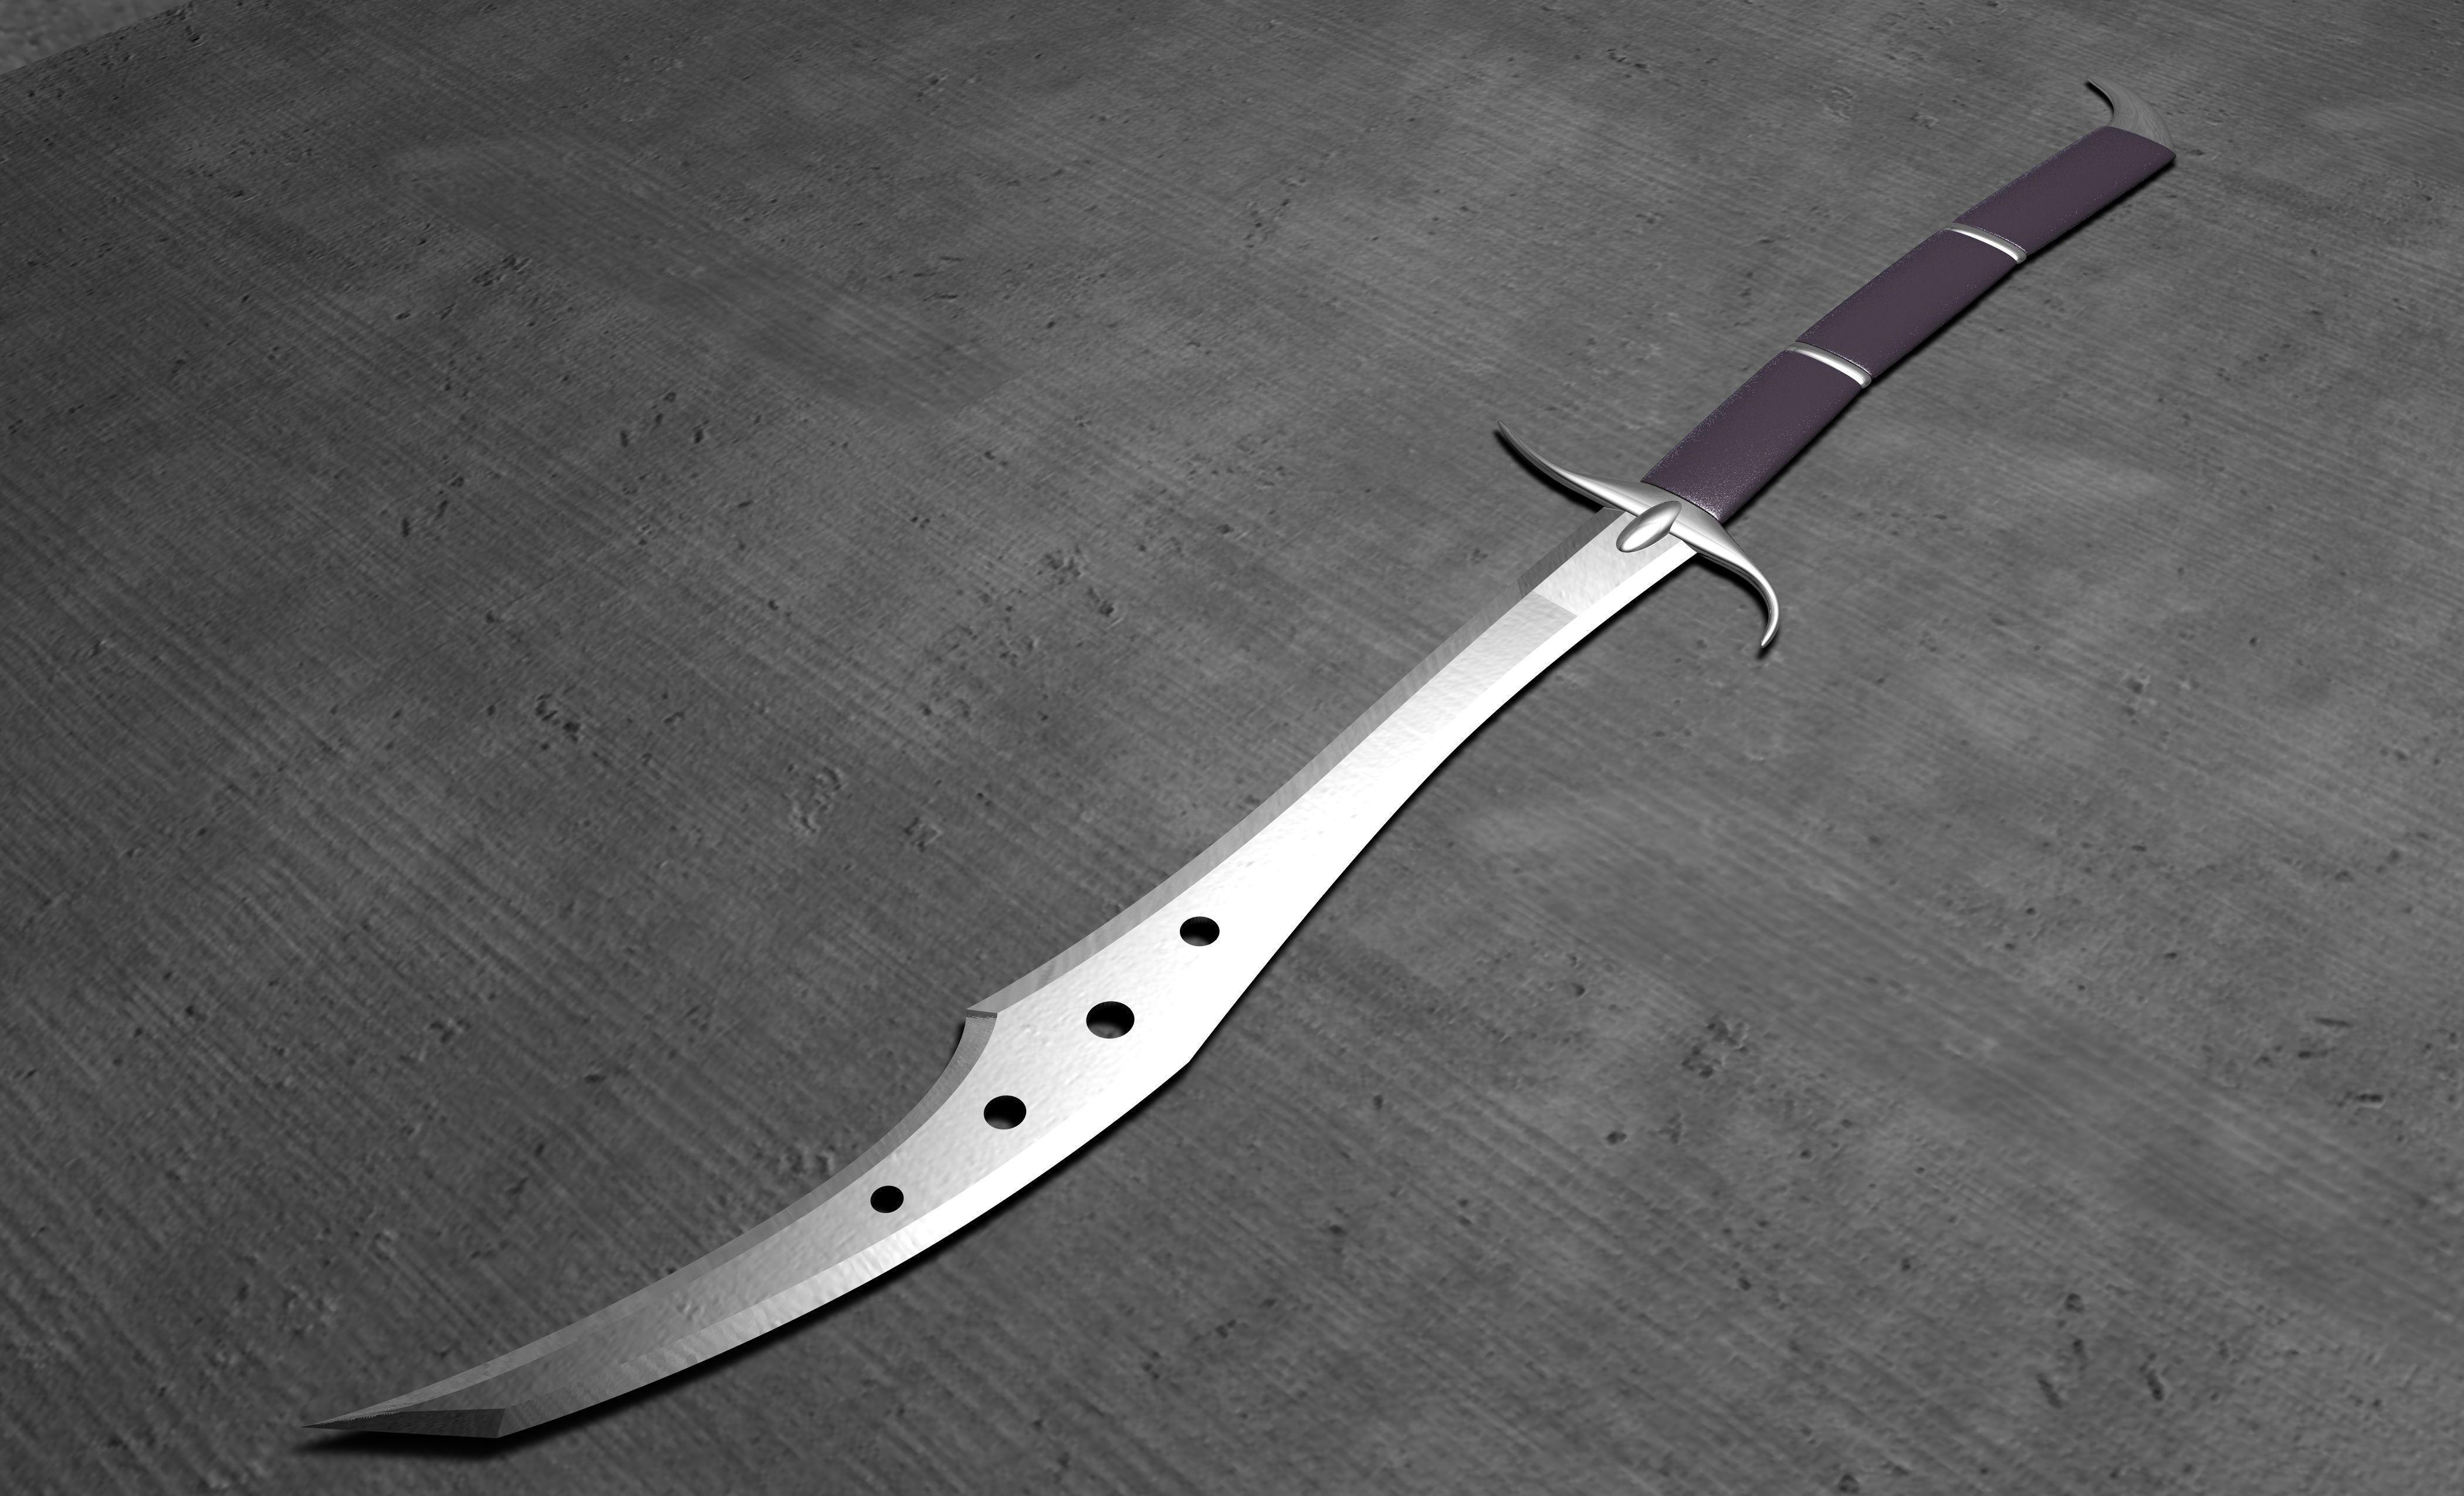 Knife Wallpaper. Free Photo Download For Android, Desktop